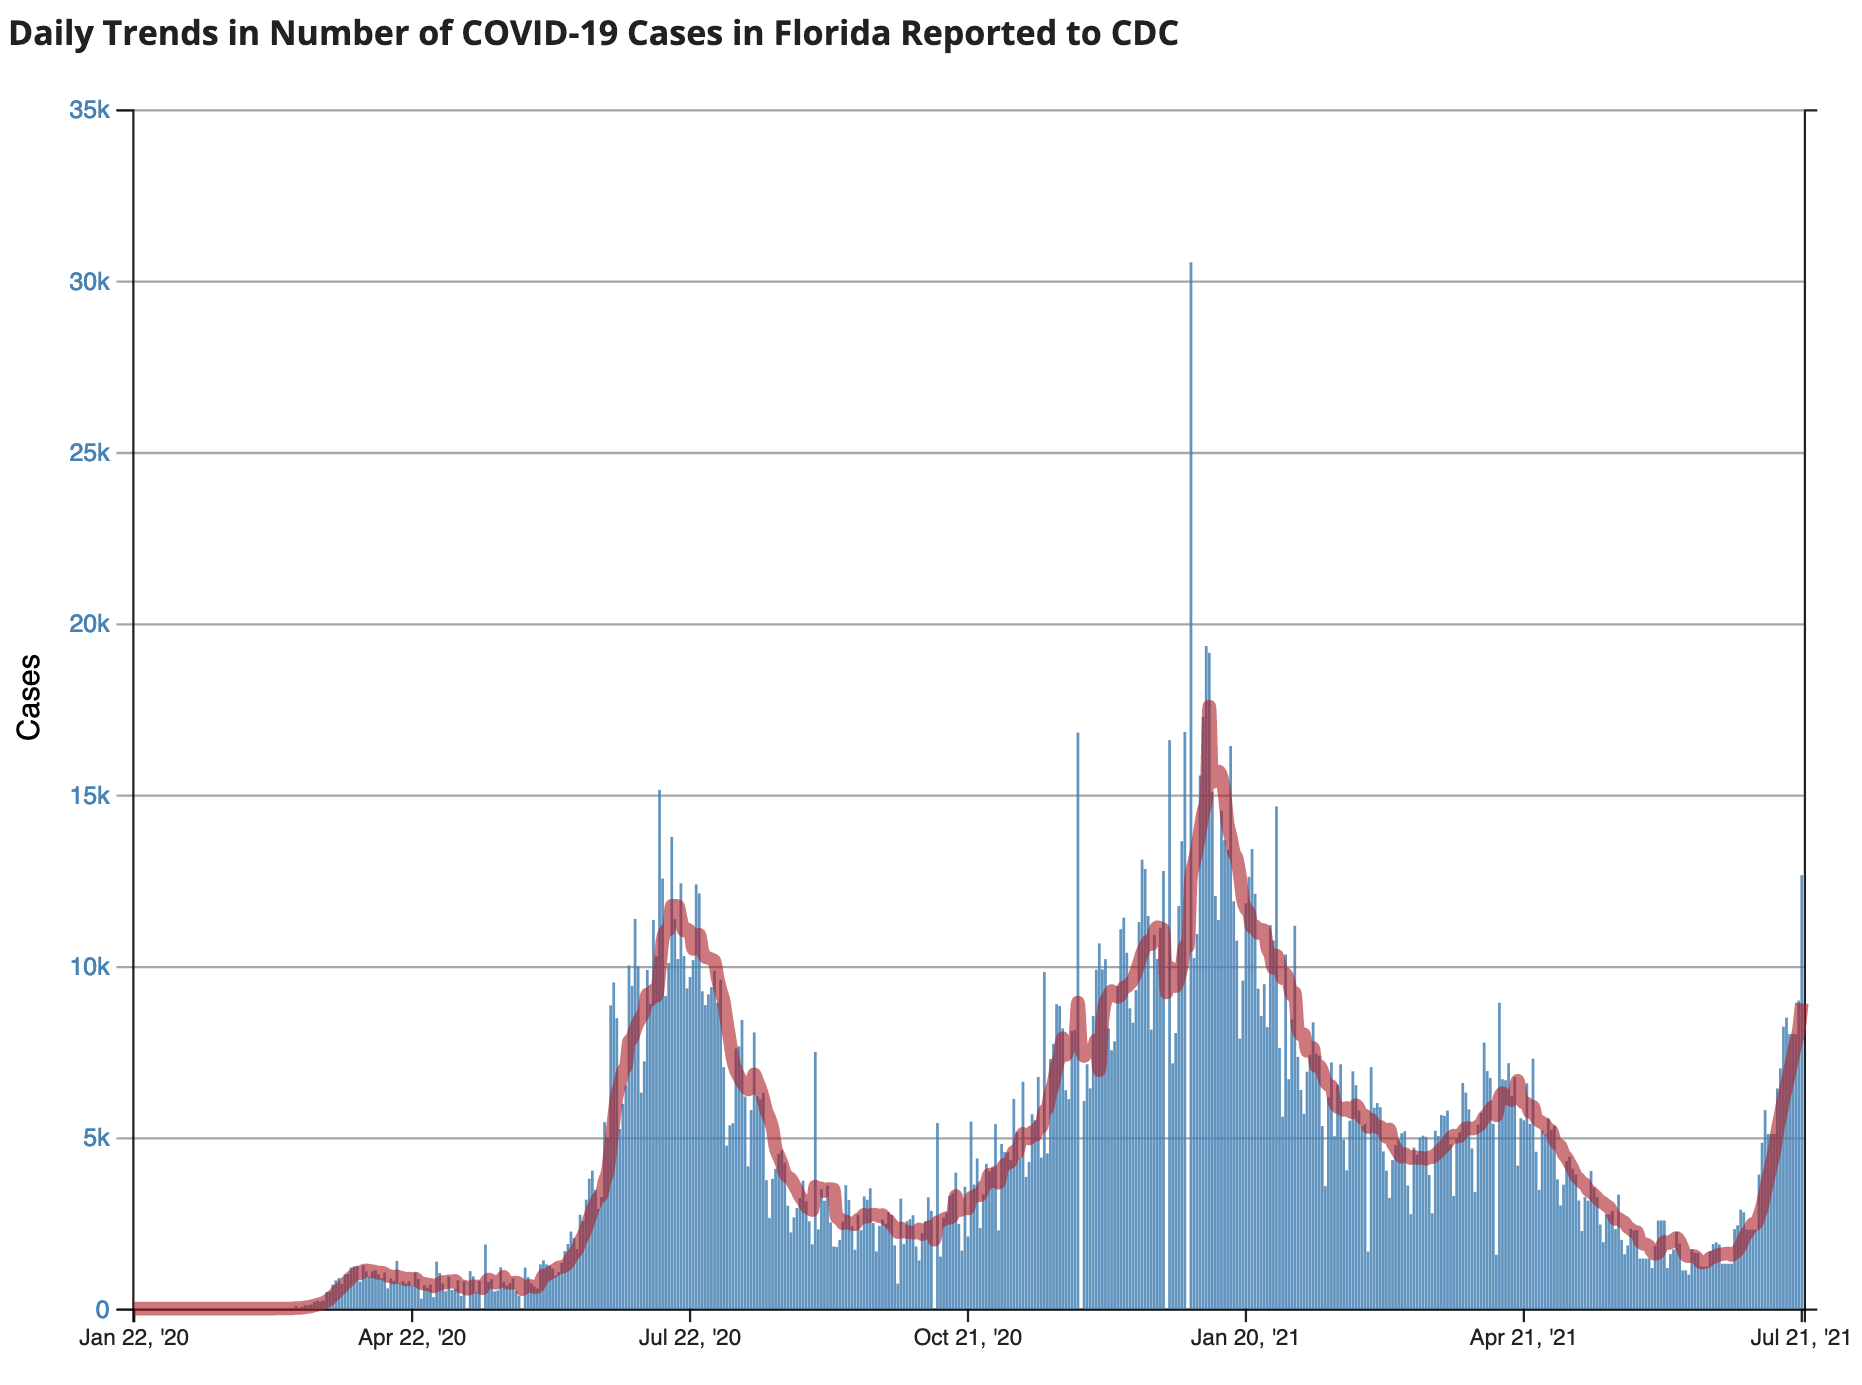 On July 21, just under 23% of all new coronavirus cases were reported in Florida